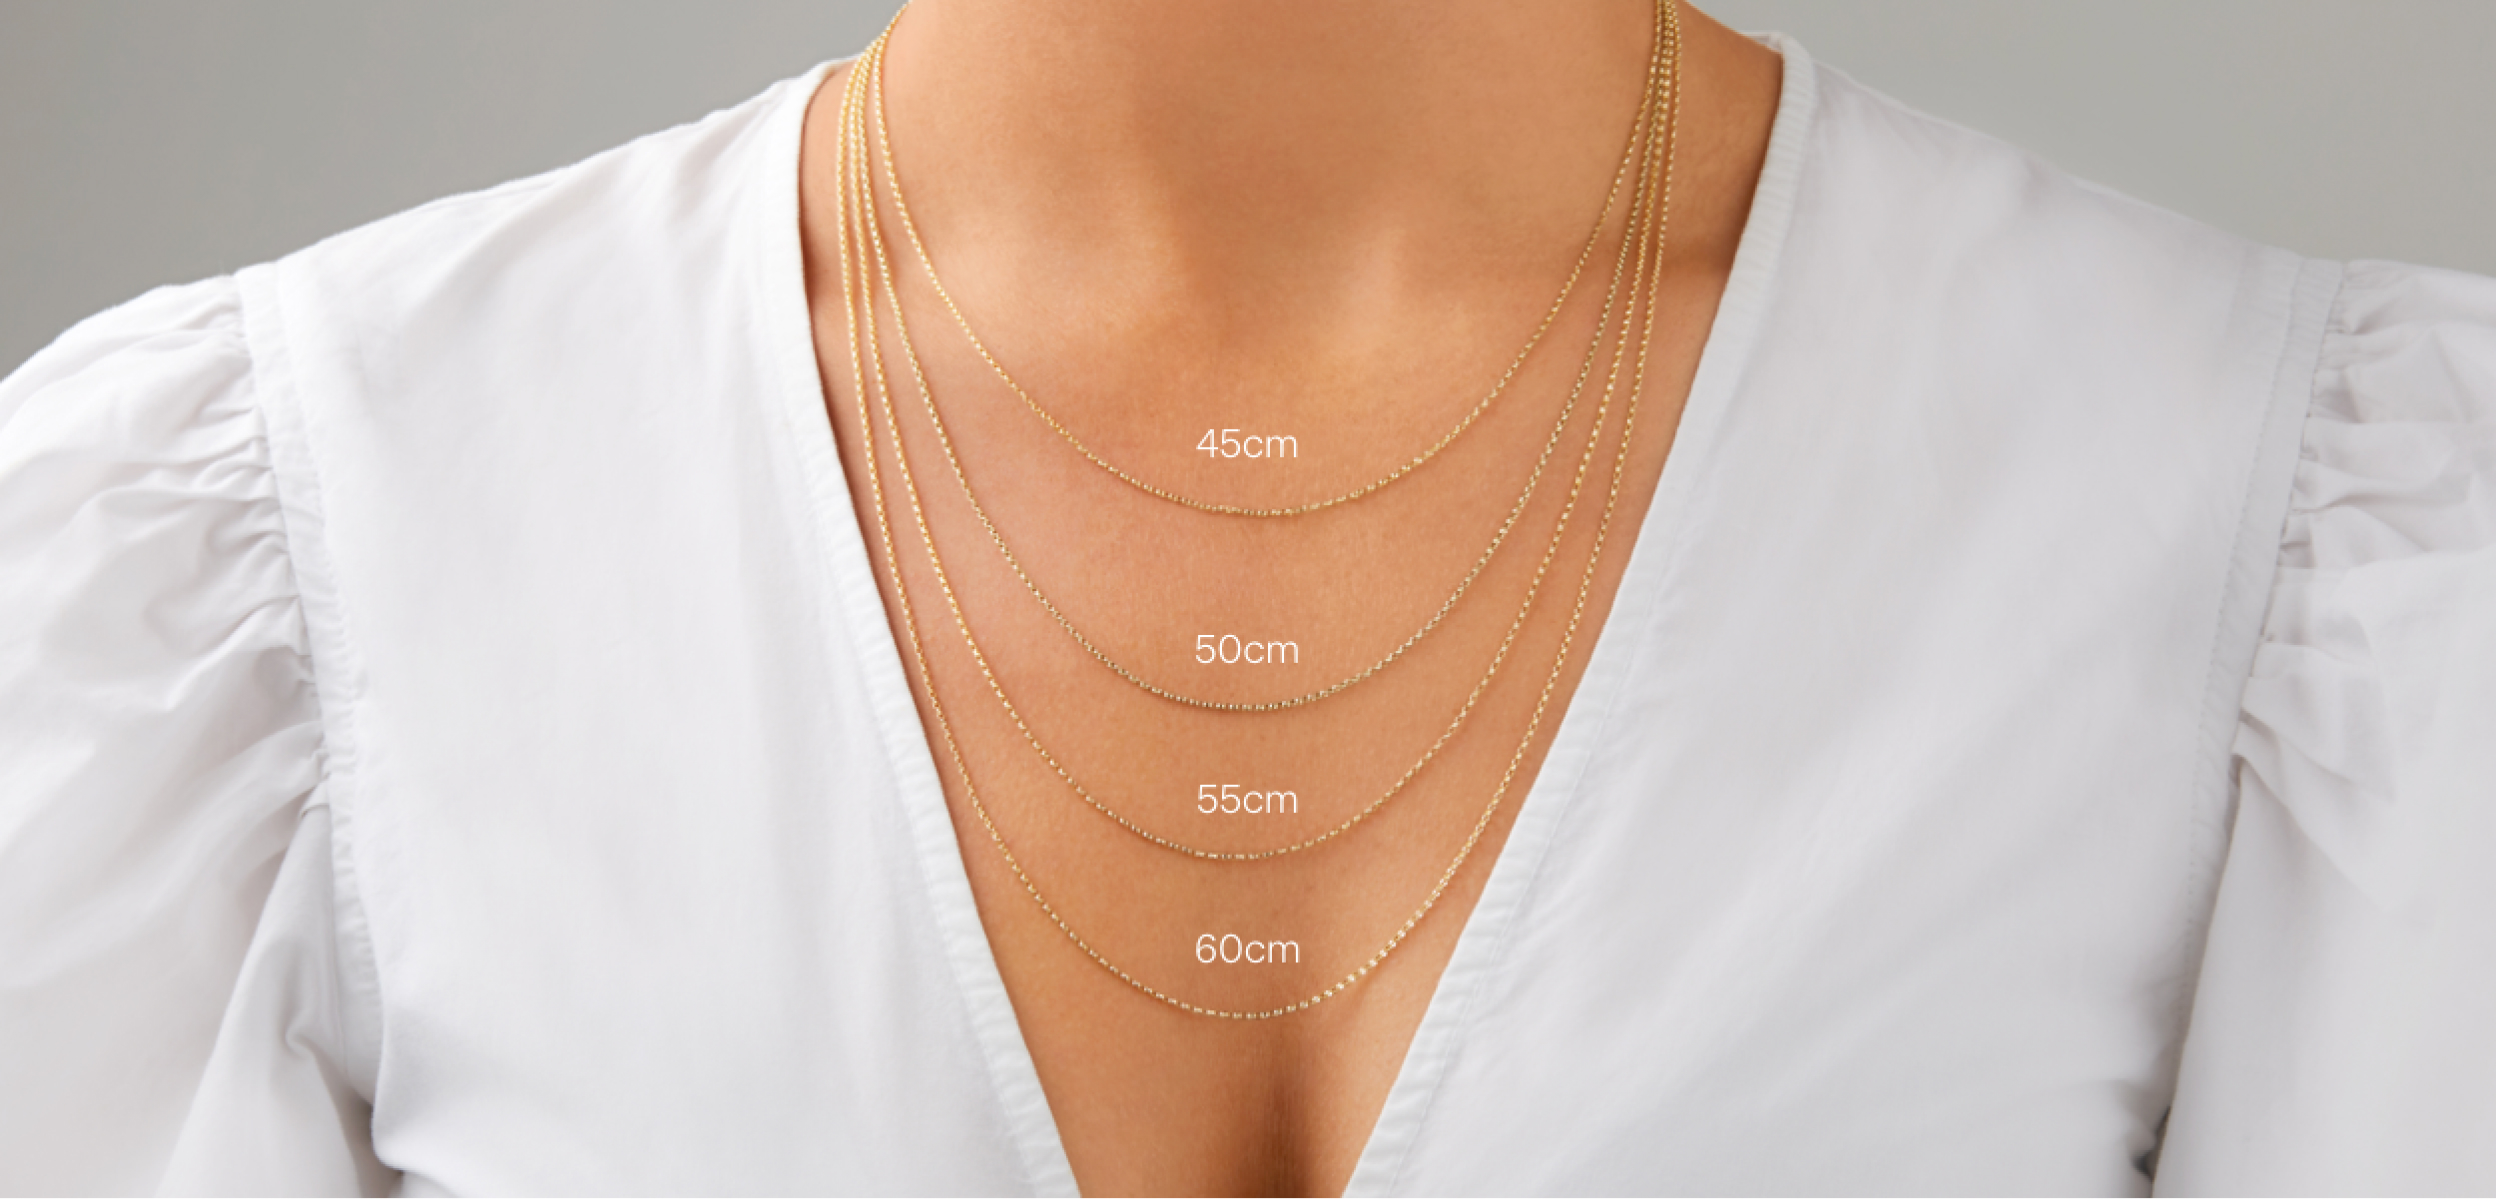 necklace length chart with person person wearing 4 gold chains showing how each measurement length looks